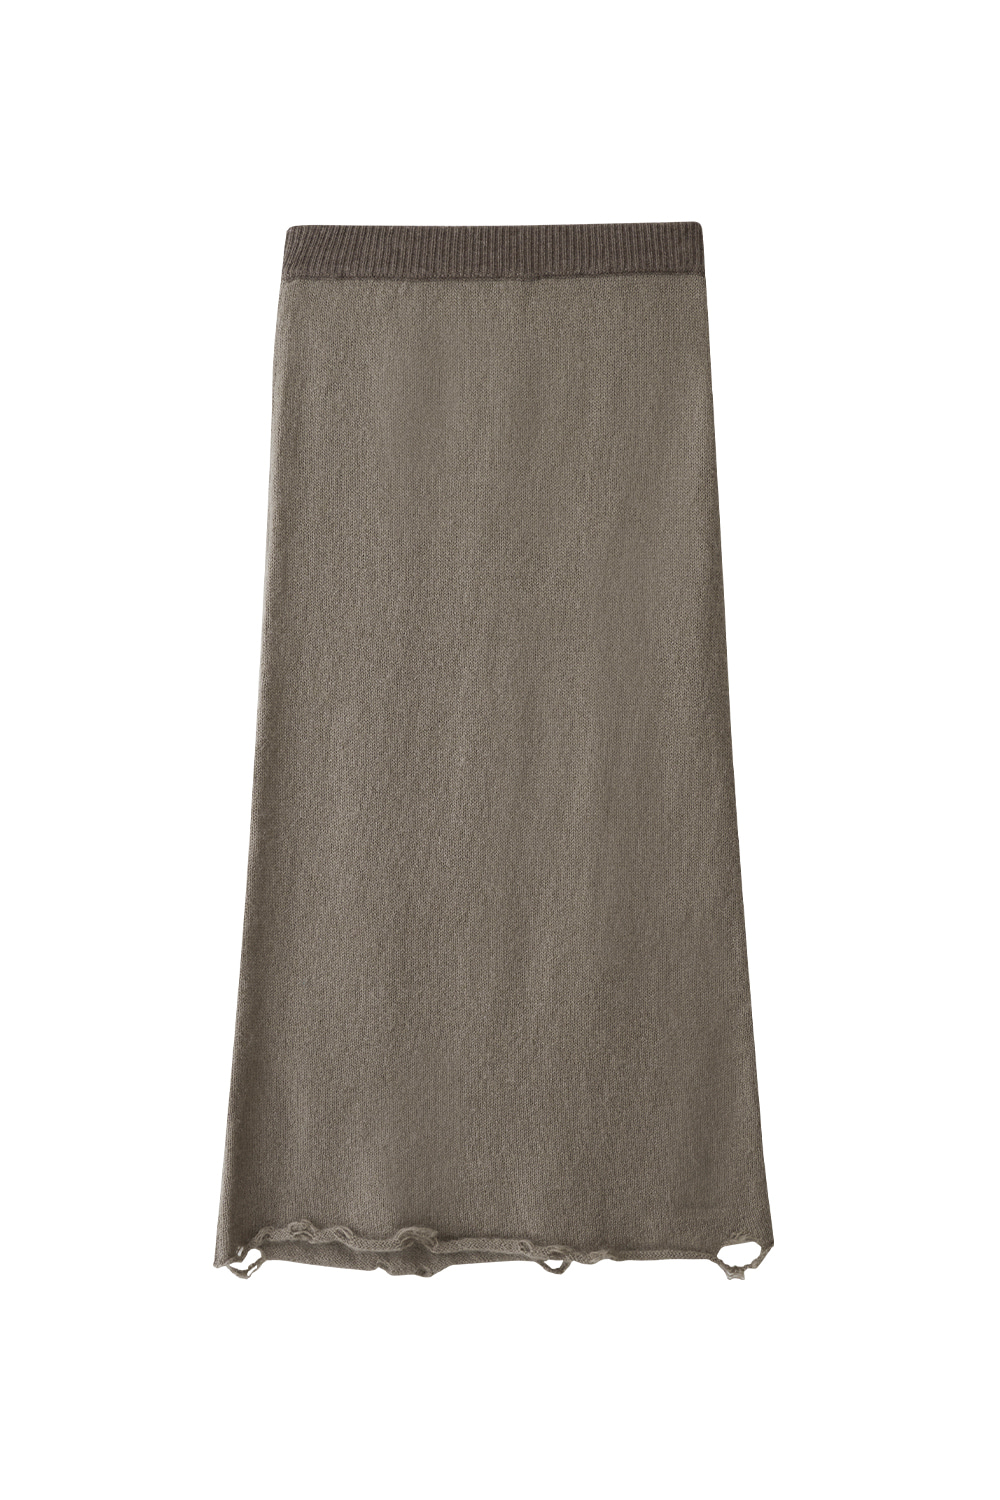 Mohair Destroyed Two tone Knit Skirt (Brown)